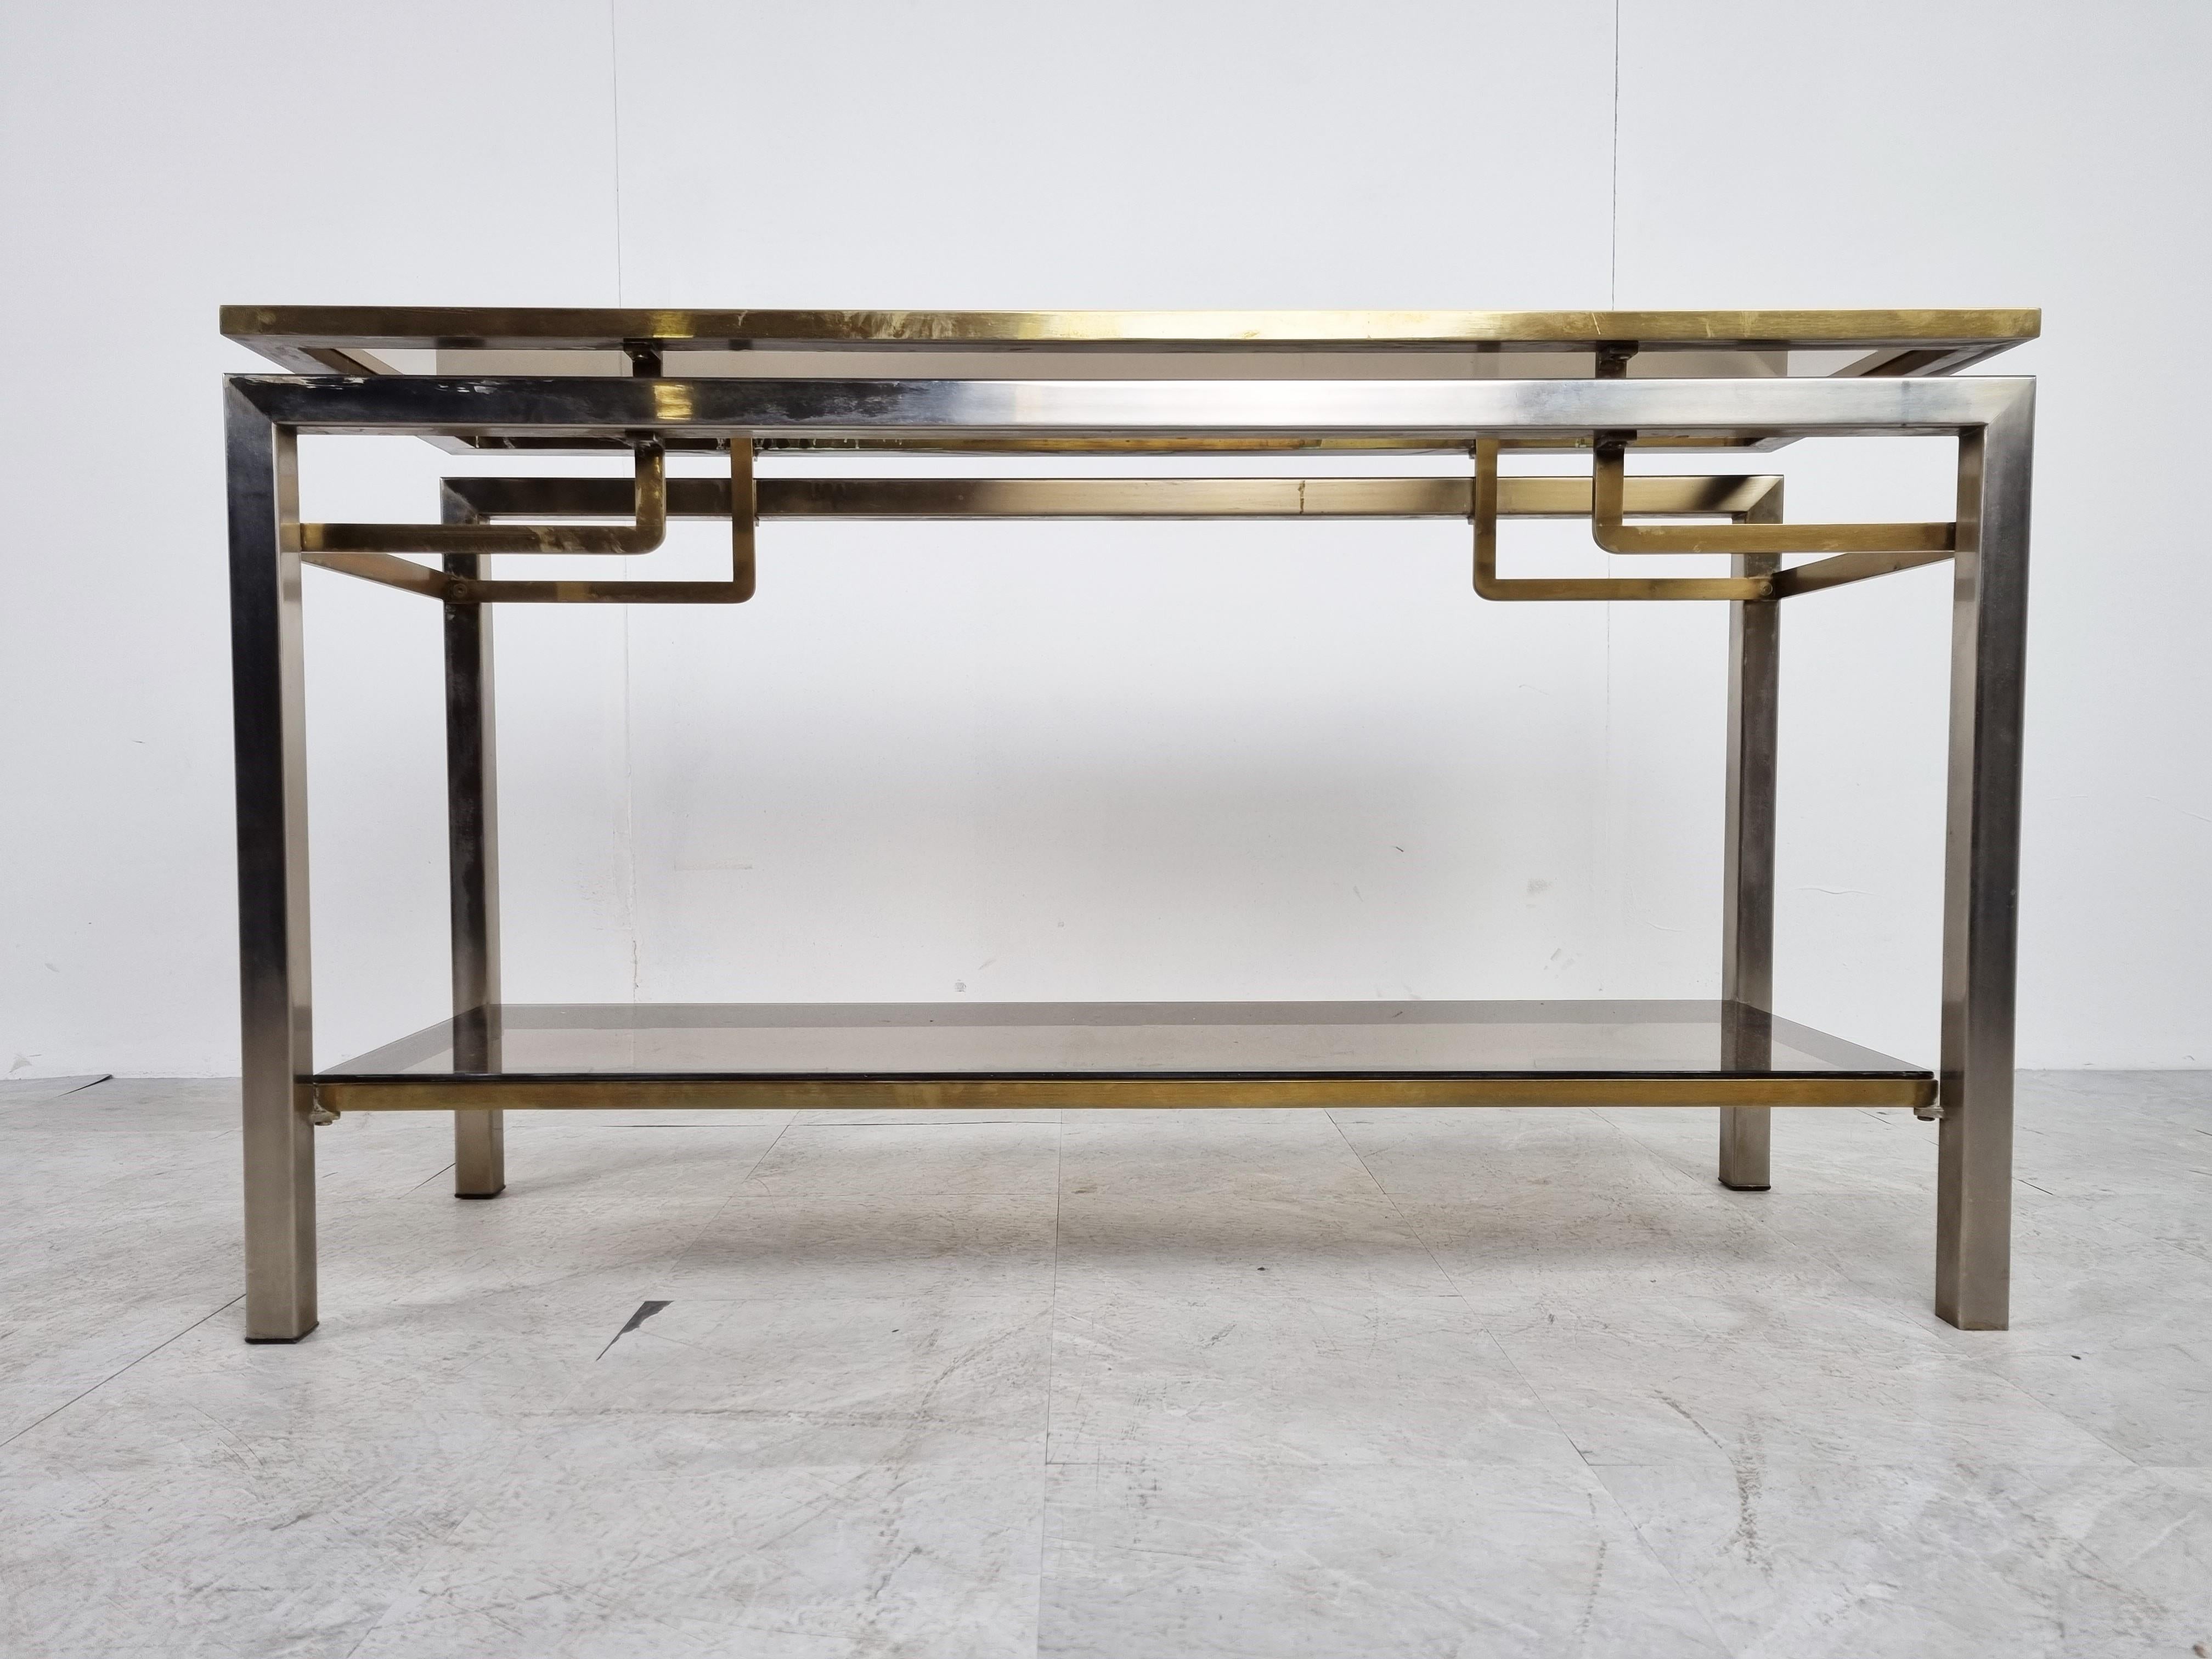 Vintage two tier brass and chrome console table with smoked glass

Good condition with normal age related wear. No faded brass or chips to the glass.

1970s - Belgium

Dimensions:
Height: 70cm/27.55